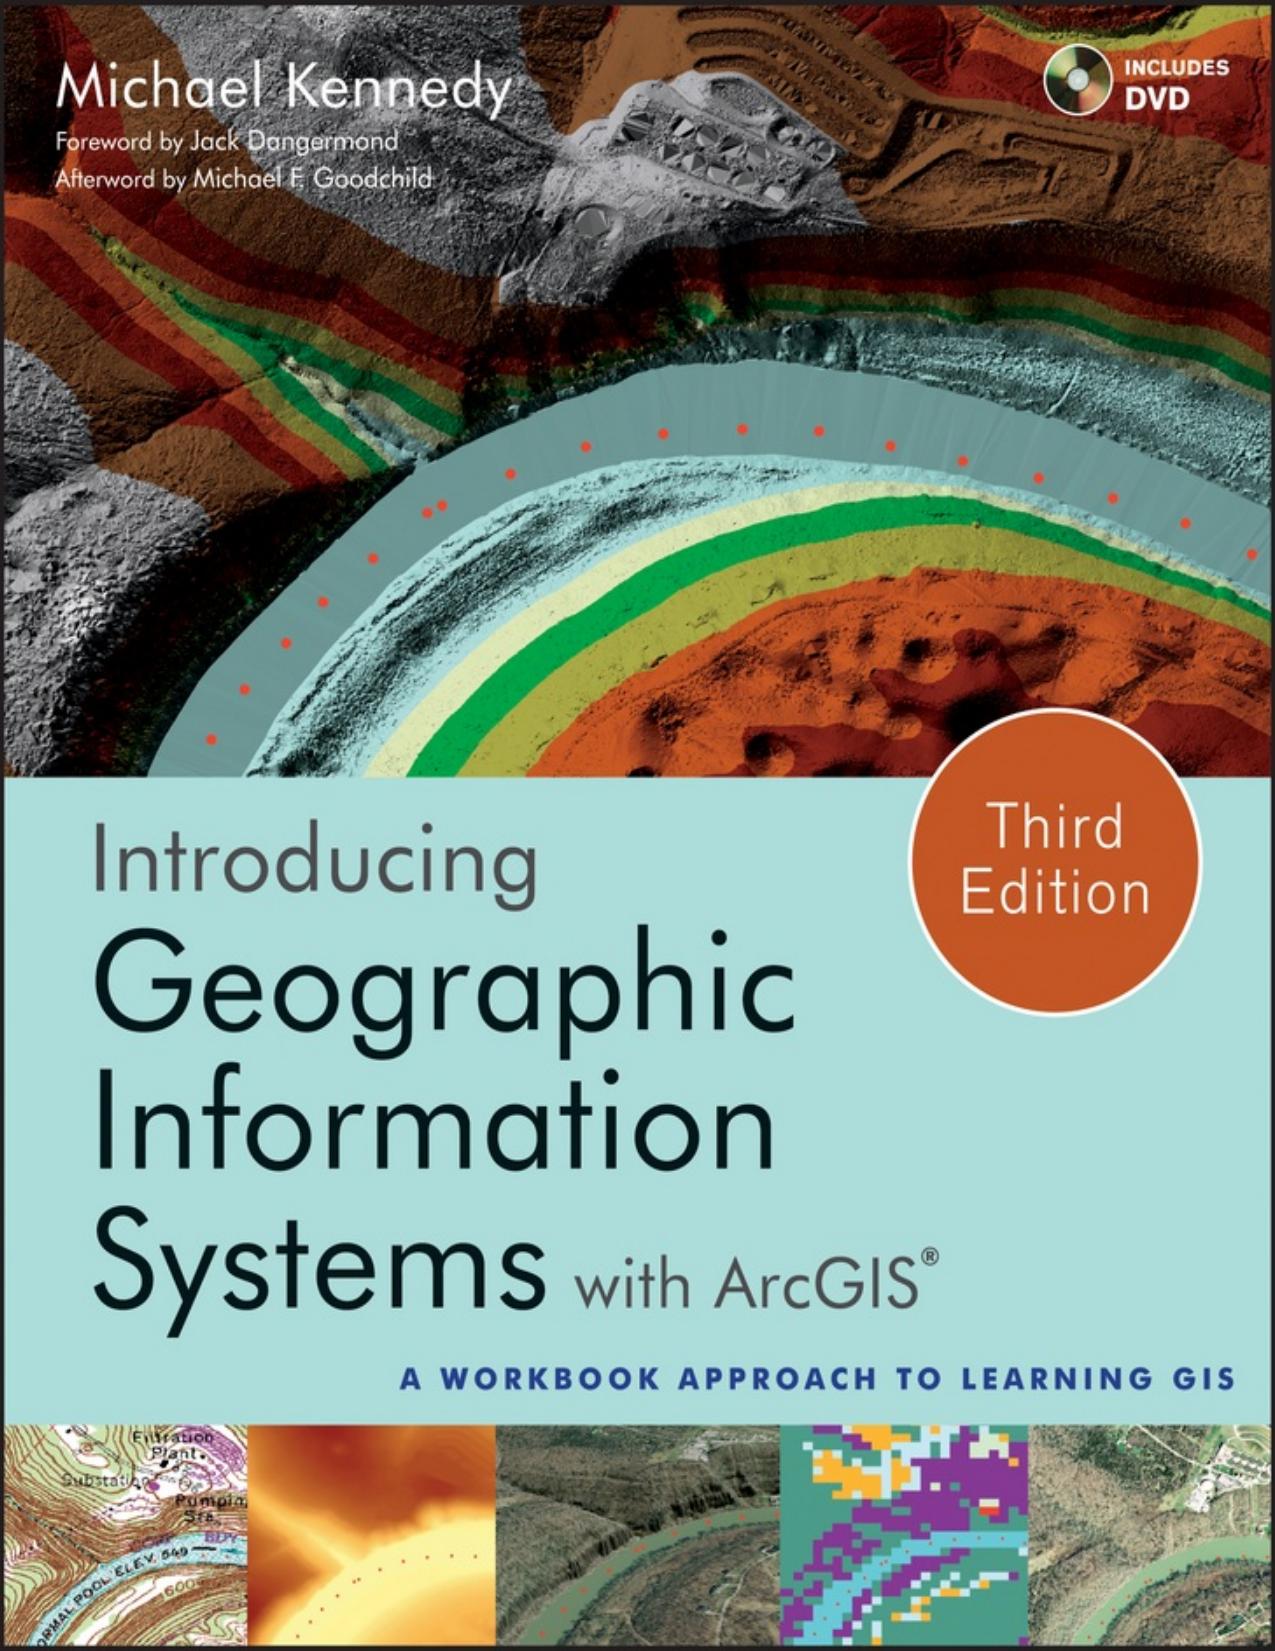 Introducing Geographic Information Systems with ArcGIS: A Workbook Approach to Learning GIS - PDFDrive.com